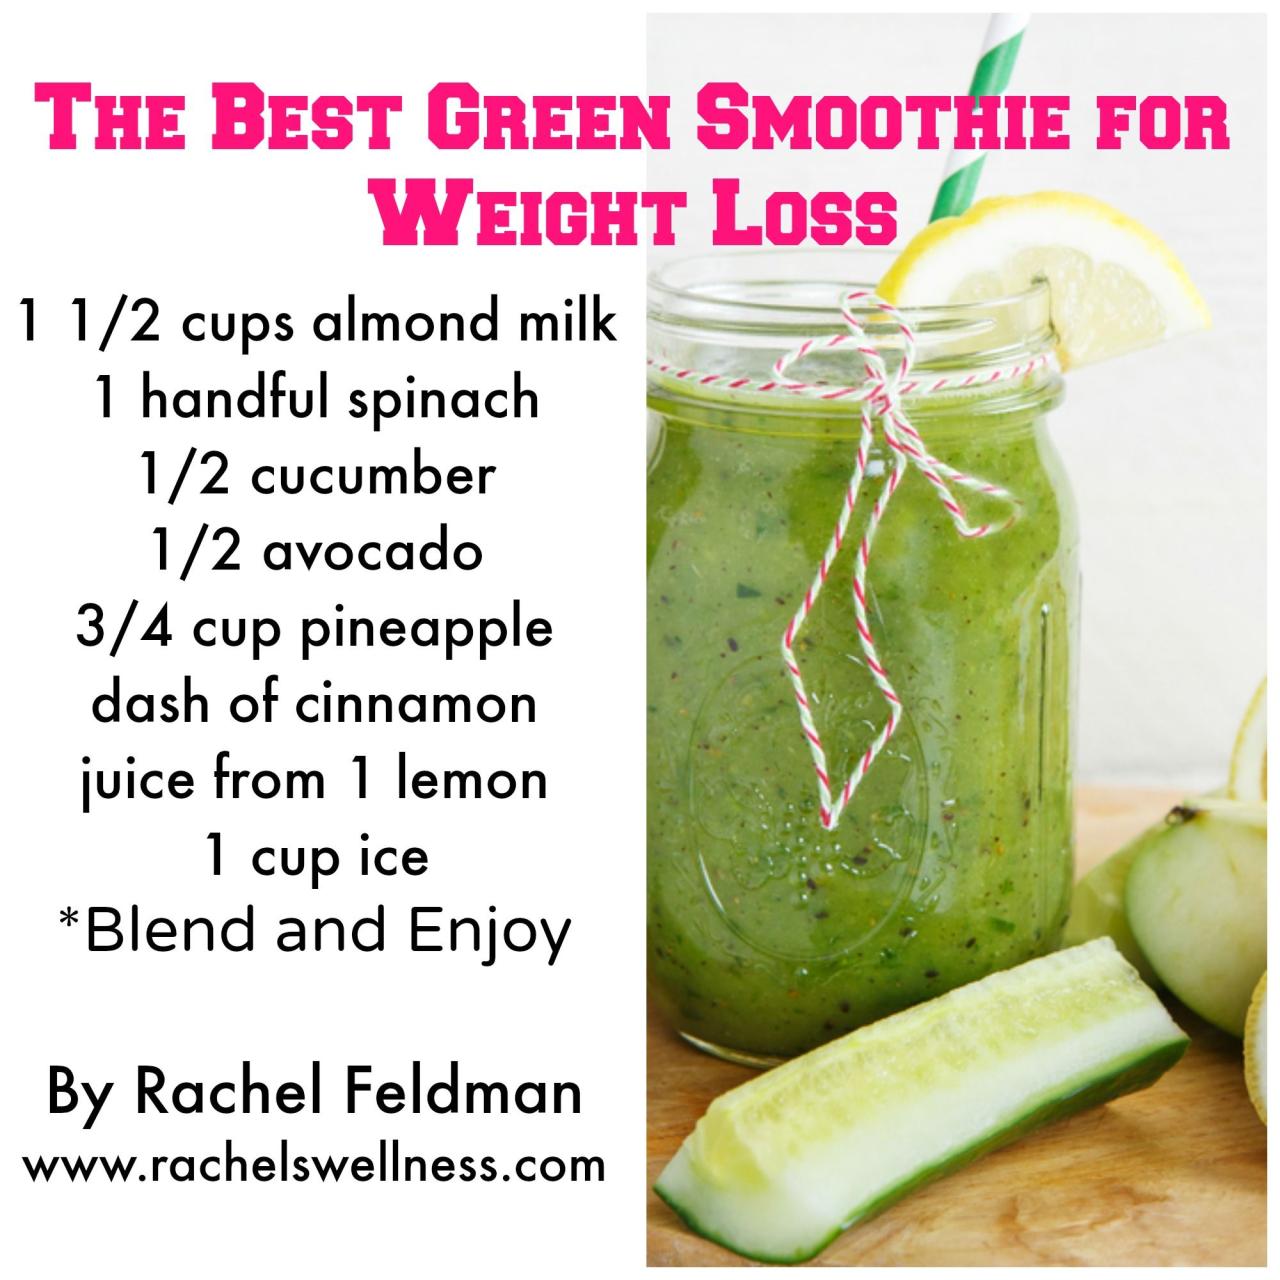 Green Smoothie Recipes For Weight Loss